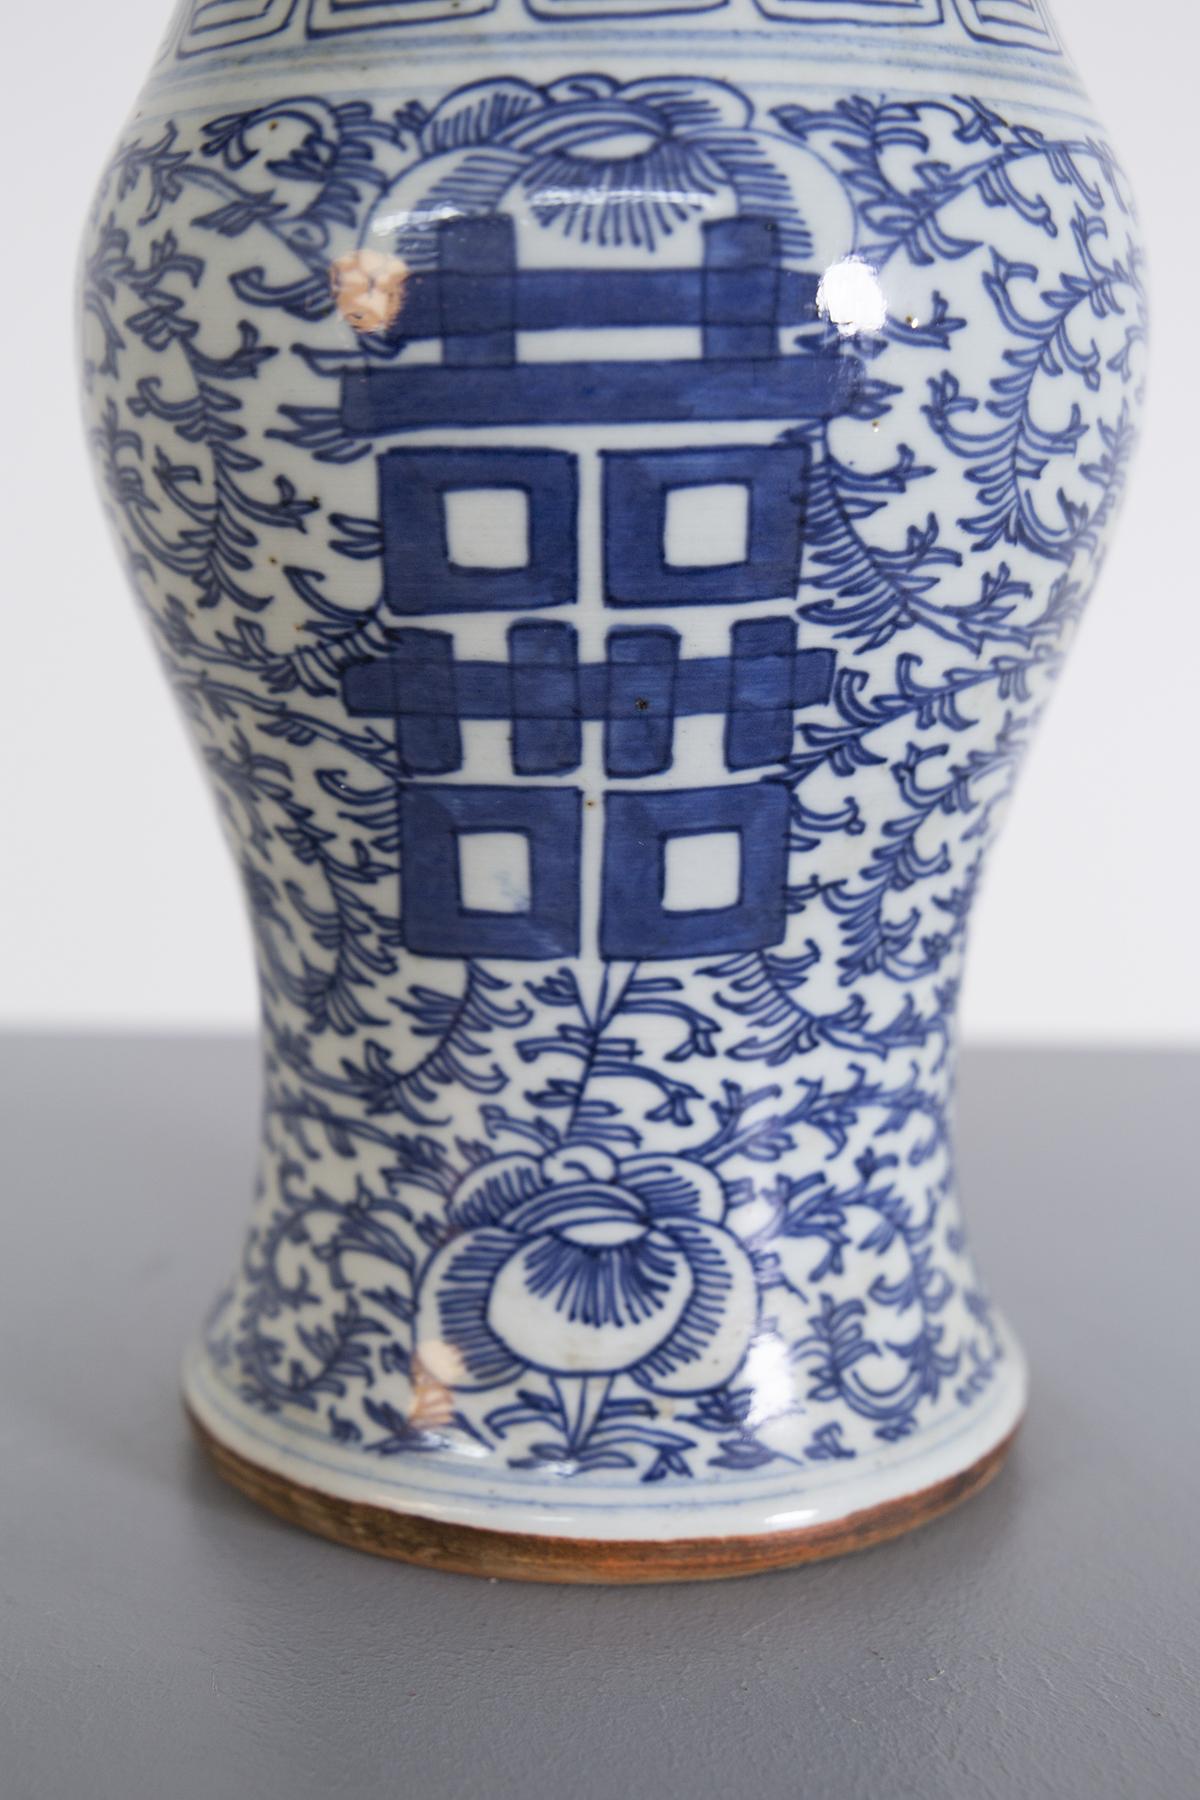 Ancient Chinese balustrade vase belonging to the period of the 